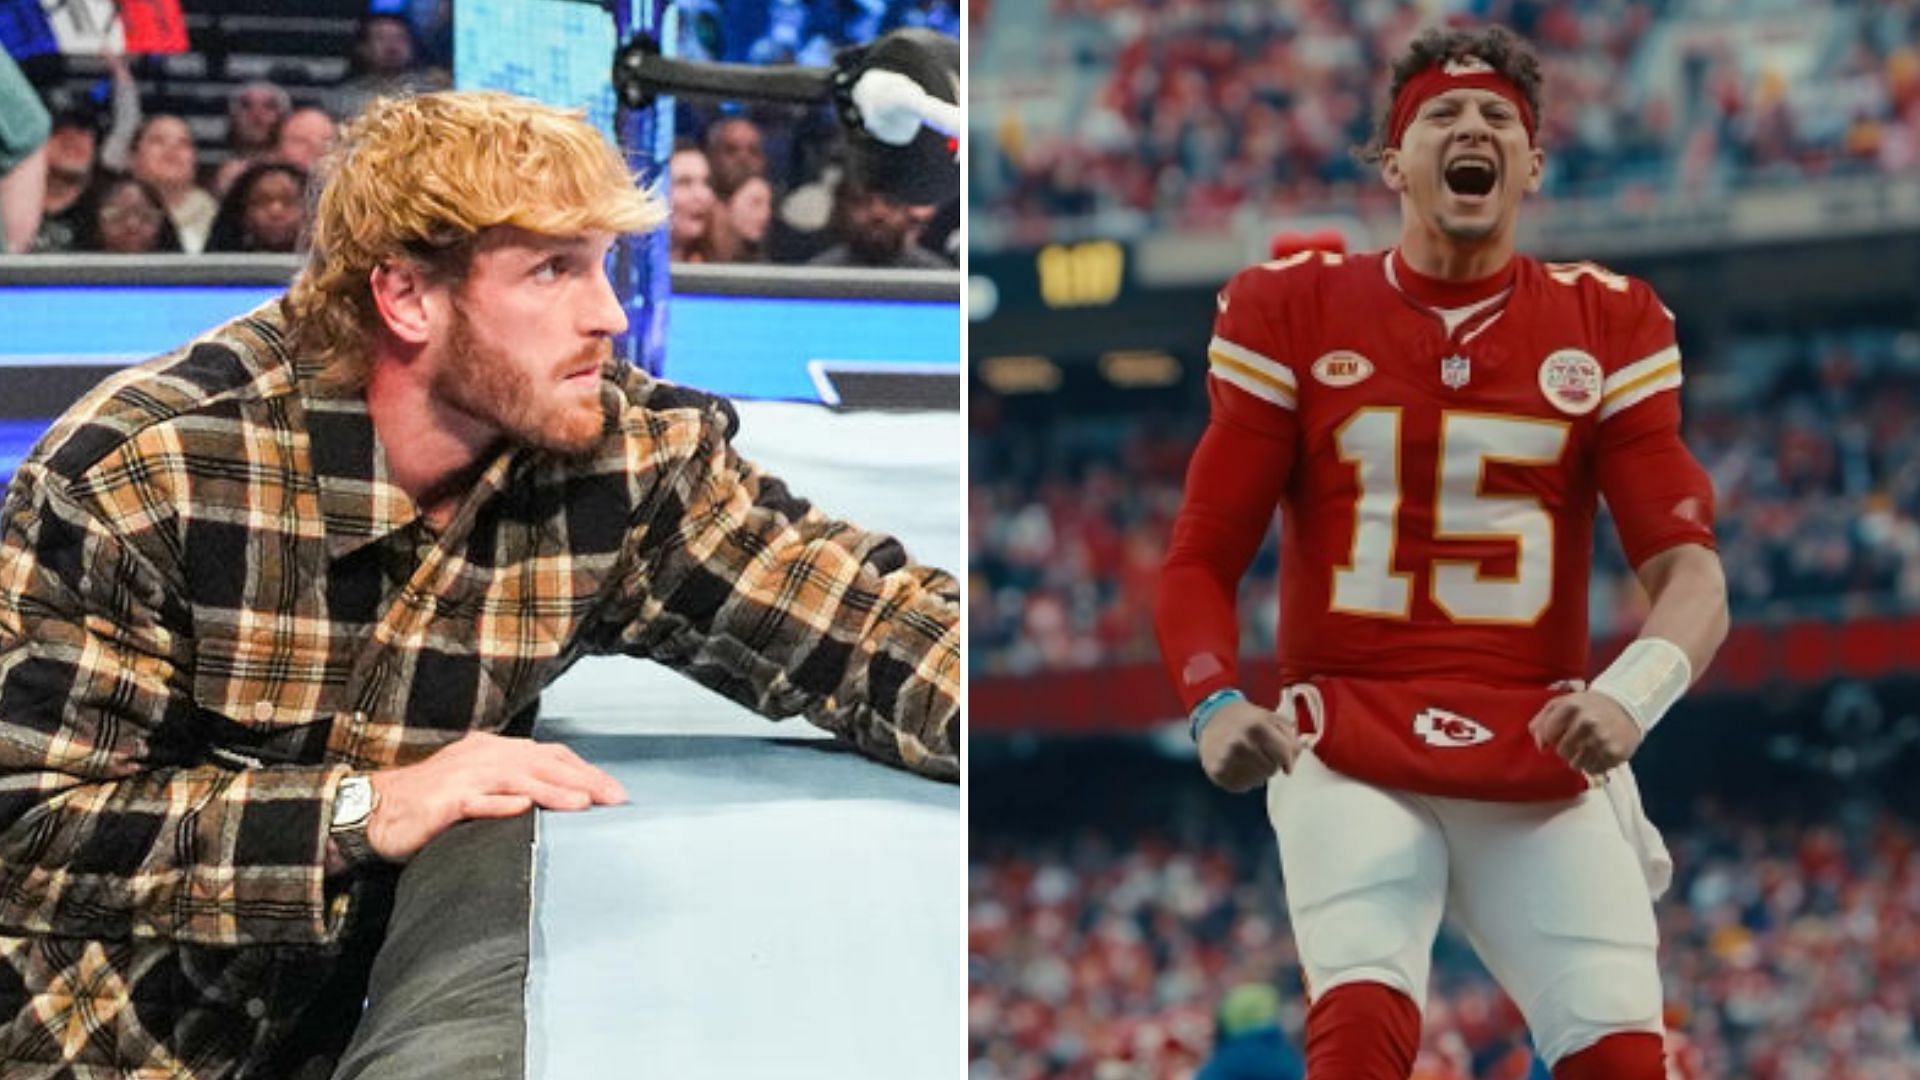 Logan Paul on the left and Patrick Mahomes on the right [Image credits: WWE.com and star